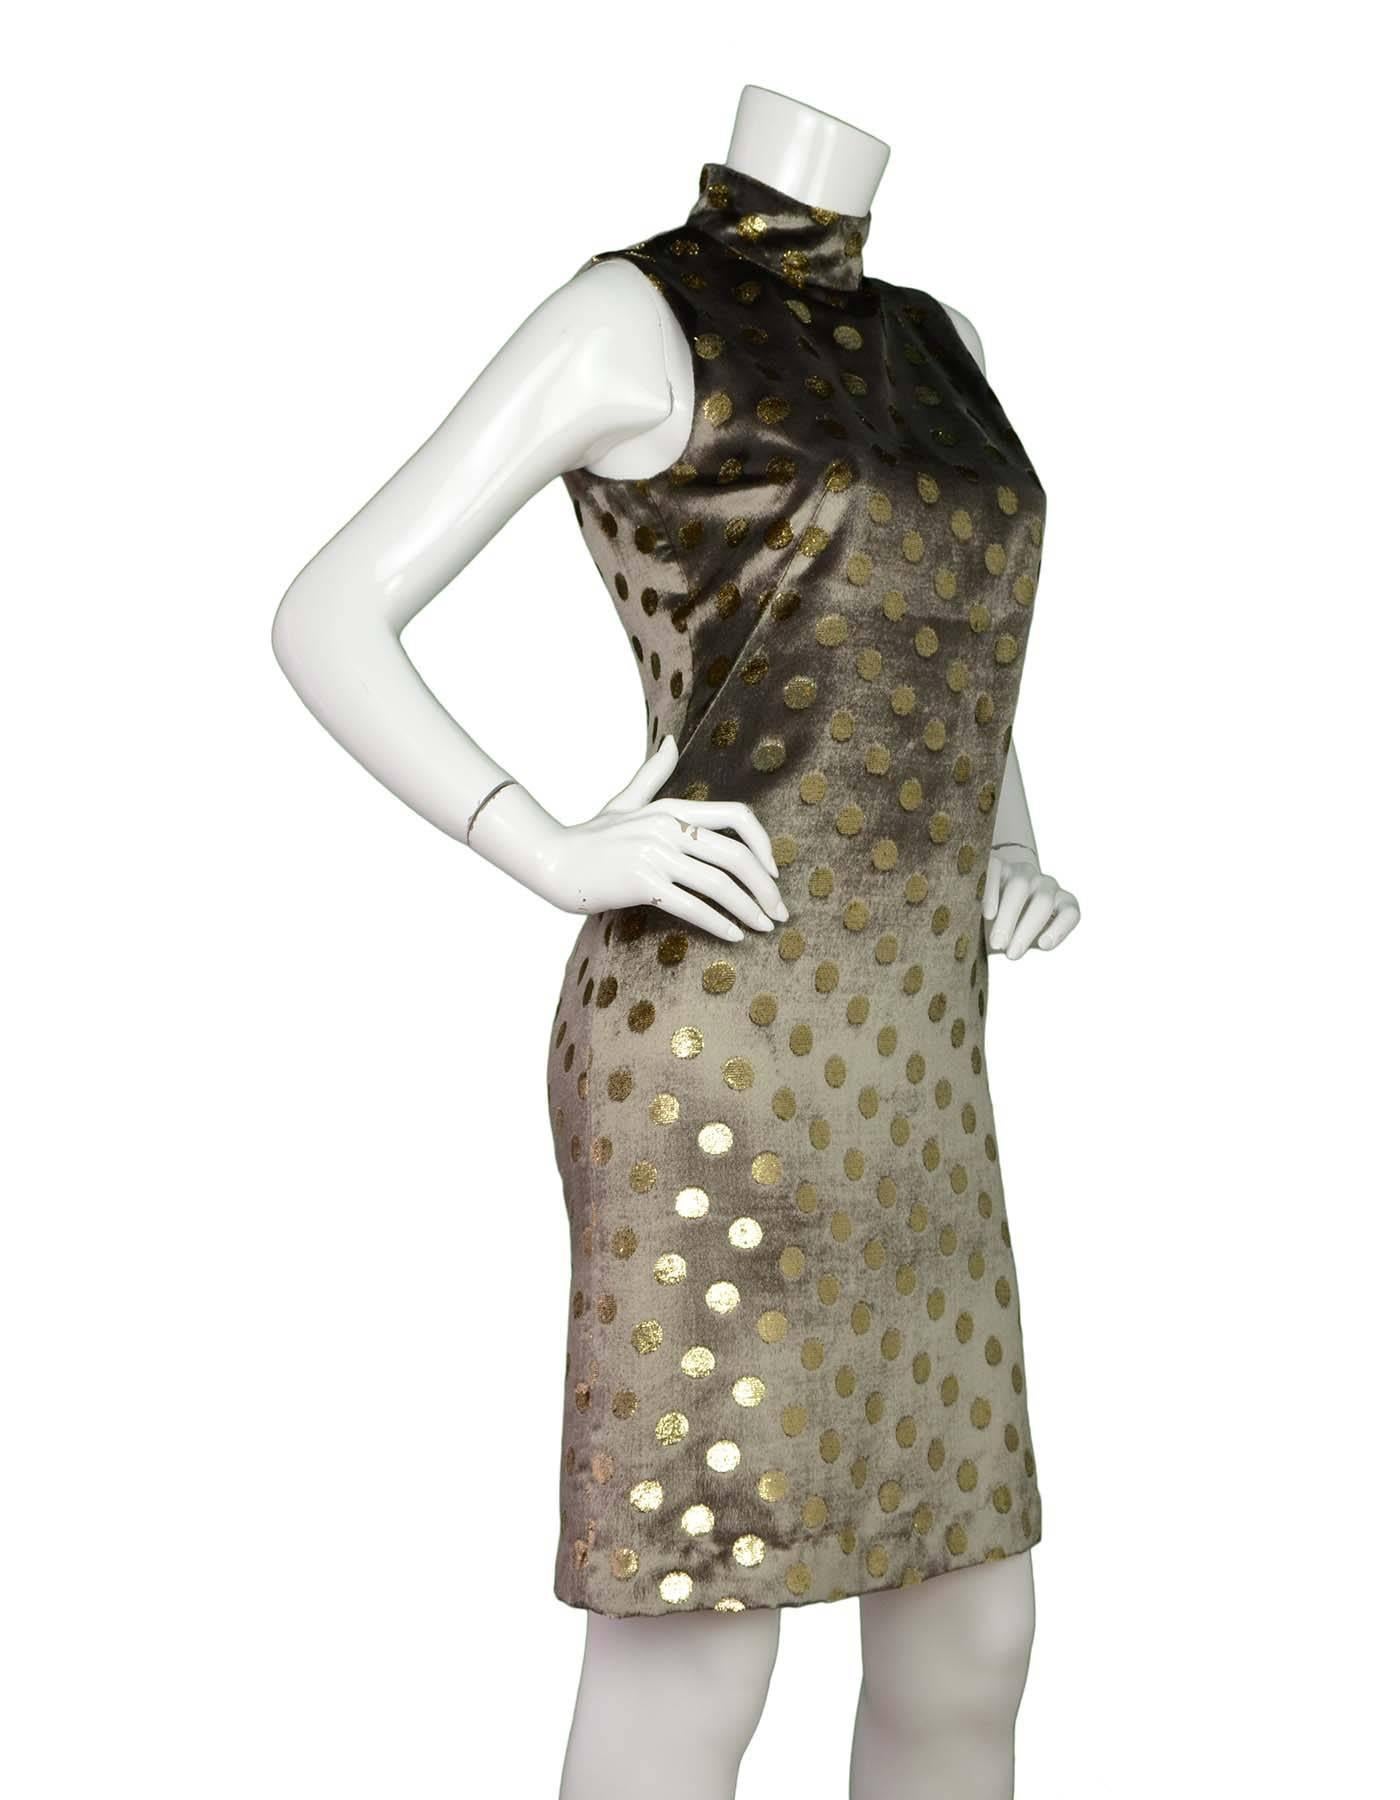 Akris Taupe Velvet Polka Dot Sleeveless Shift Dress 
Features metallic polka dots throughout and a standing collar
Made In: Romania
Color: Taupe and gold
Composition: 64% viscose, 22% silk, 14% polyester
Lining: Taupe, 100%